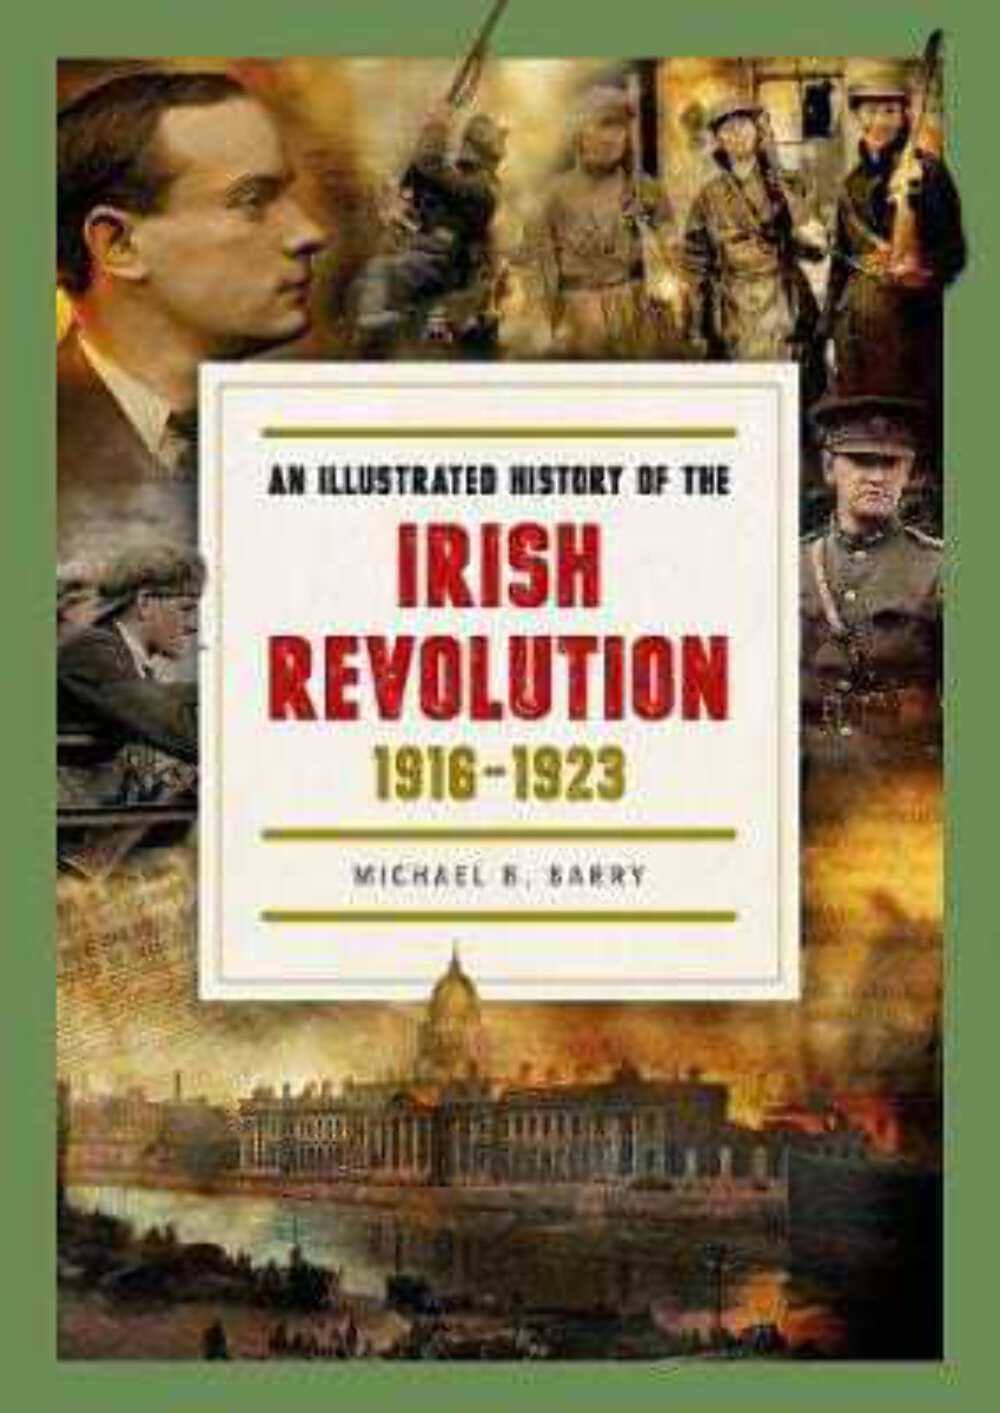 An Illustrated History of the Irish Revolution, by Michael B. Barry